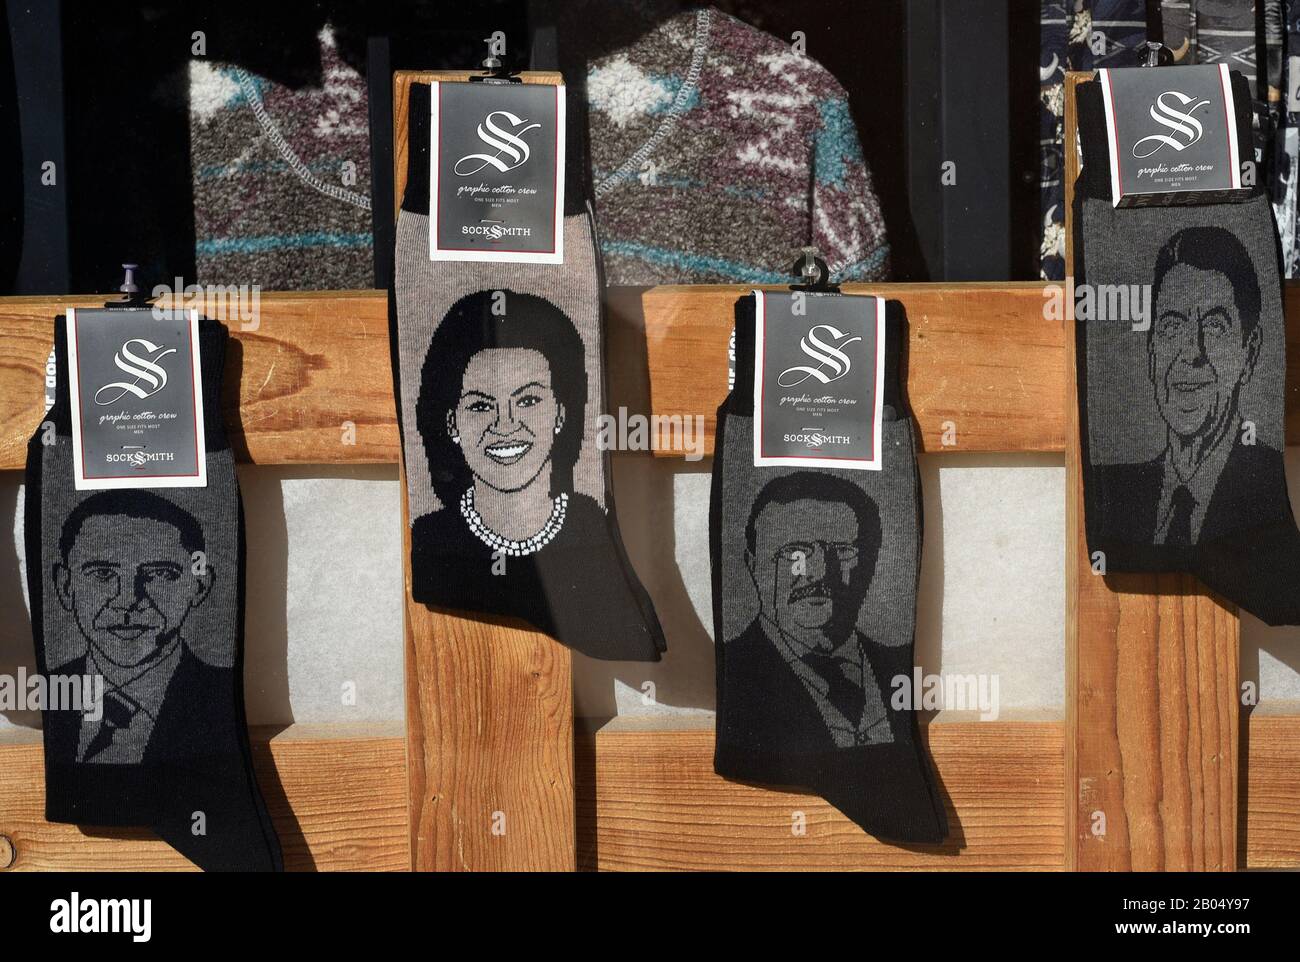 Pairs of Socksmith brand novelty socks for sale in Santa Fe, New Mexico, feature portraits of Barack Obama and Michelle Obama Stock Photo